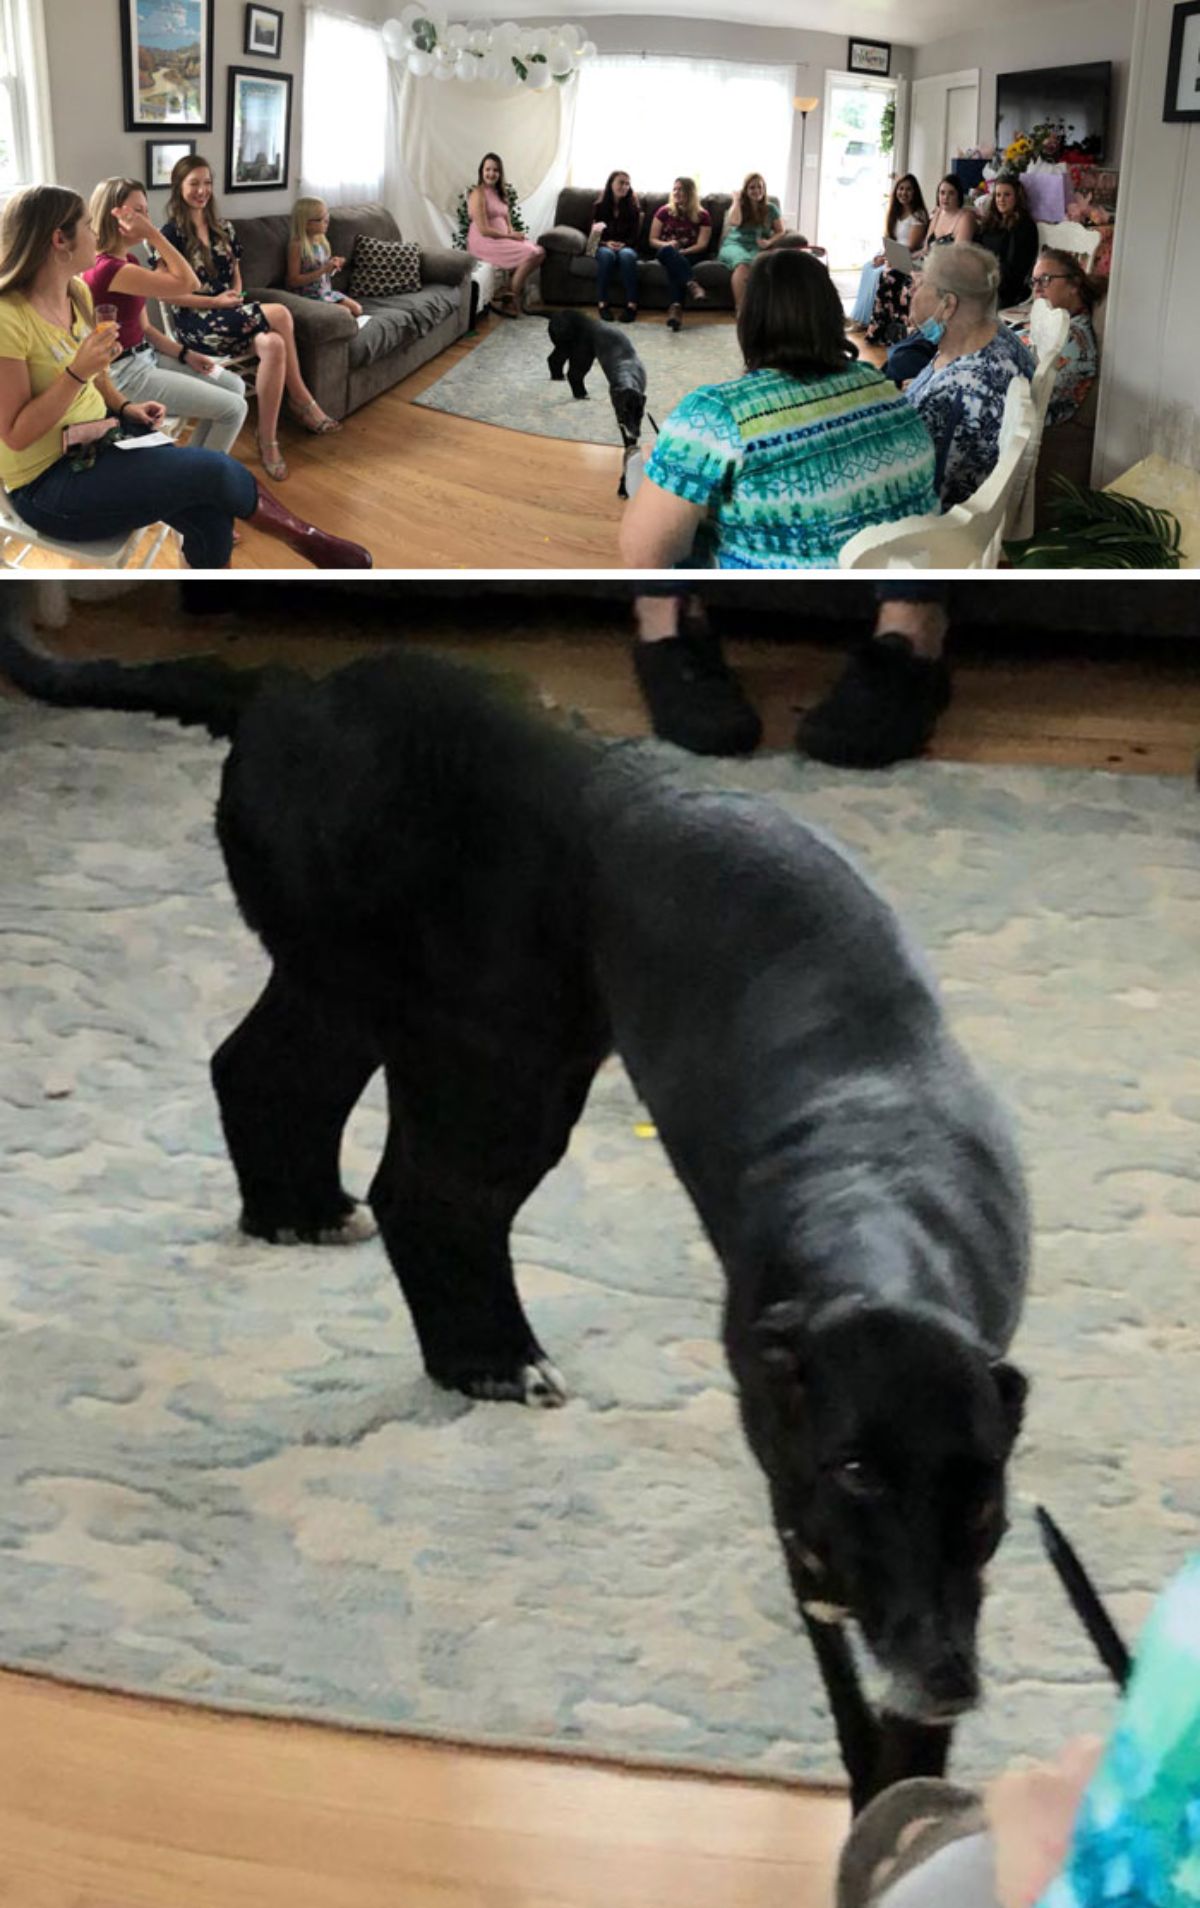 panoramic fail of black dog with a long body surrounded by women and 1 photo of a close up of the dog